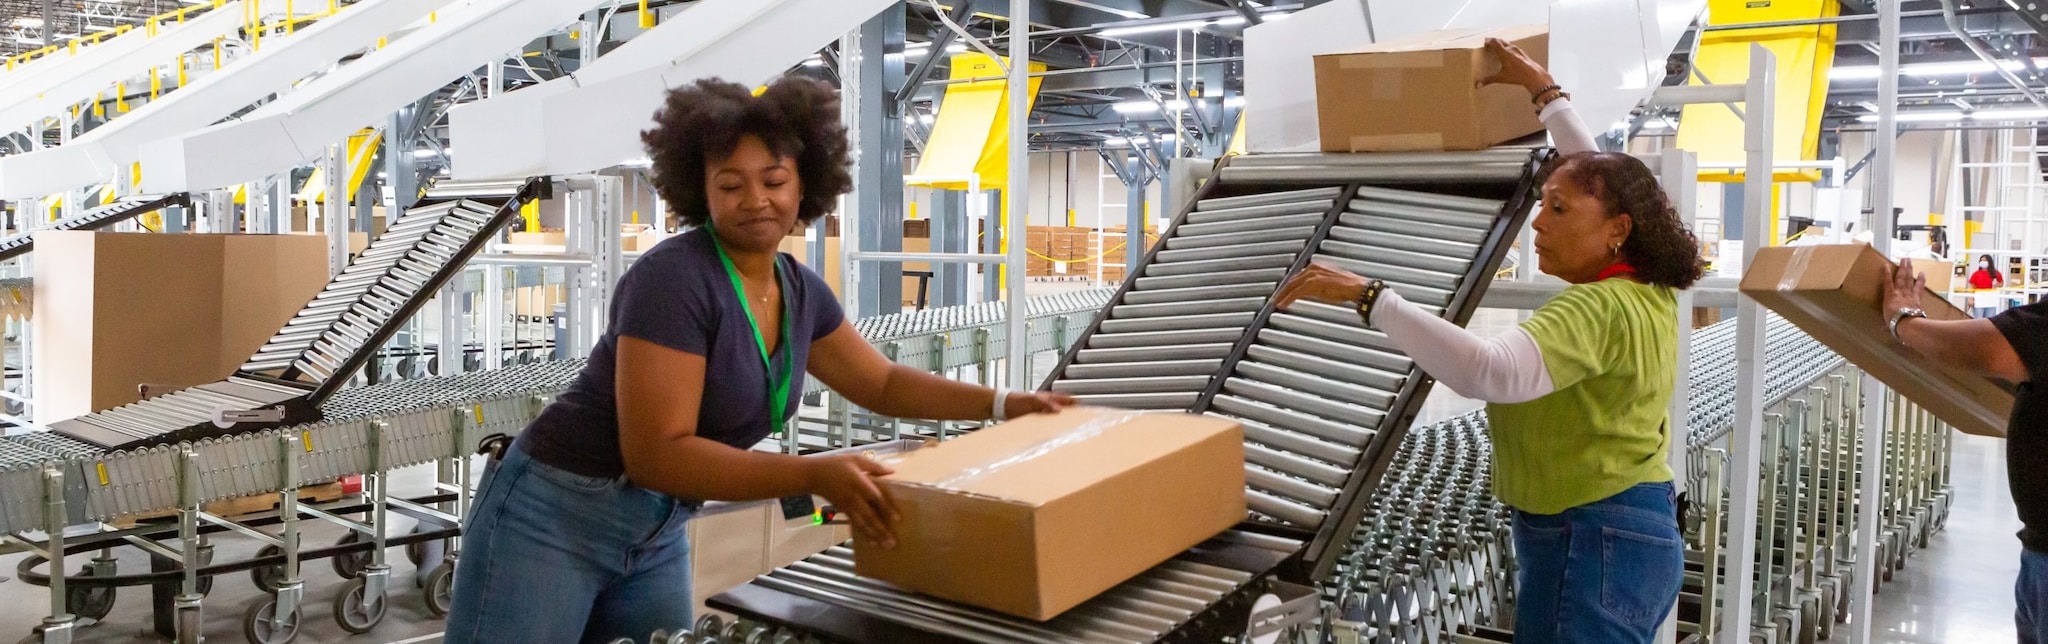 Fulfillment Center Employees Pushing Boxes Along Rollers